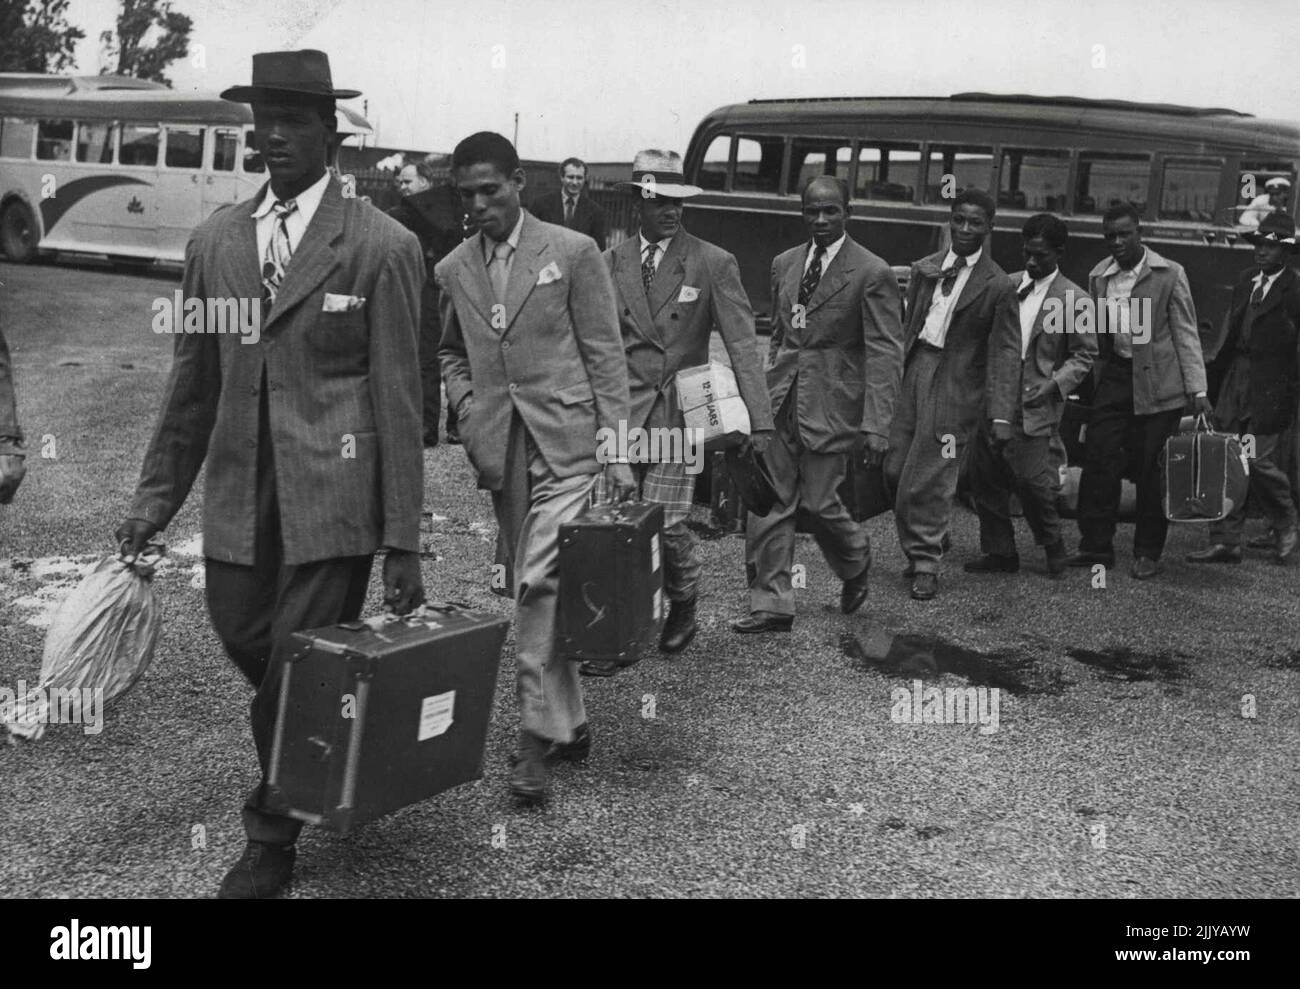 Looking For Work -- The immigrating Jamaicans landing to go to the special coaches which were taking those without friends to London to spend their first ***** in the ***** shelters at Clapham. The emigration in reverse has brought nearly 500 Jamaicans to England. They arrived early this morning aboard the liner Empire Windrush, and hope to find work in England - some will rejoin the RAF, some will work as miners, many are ***** technicians, they all hope for the work here they cannot find in their own country. June 22, 1948. Stock Photo